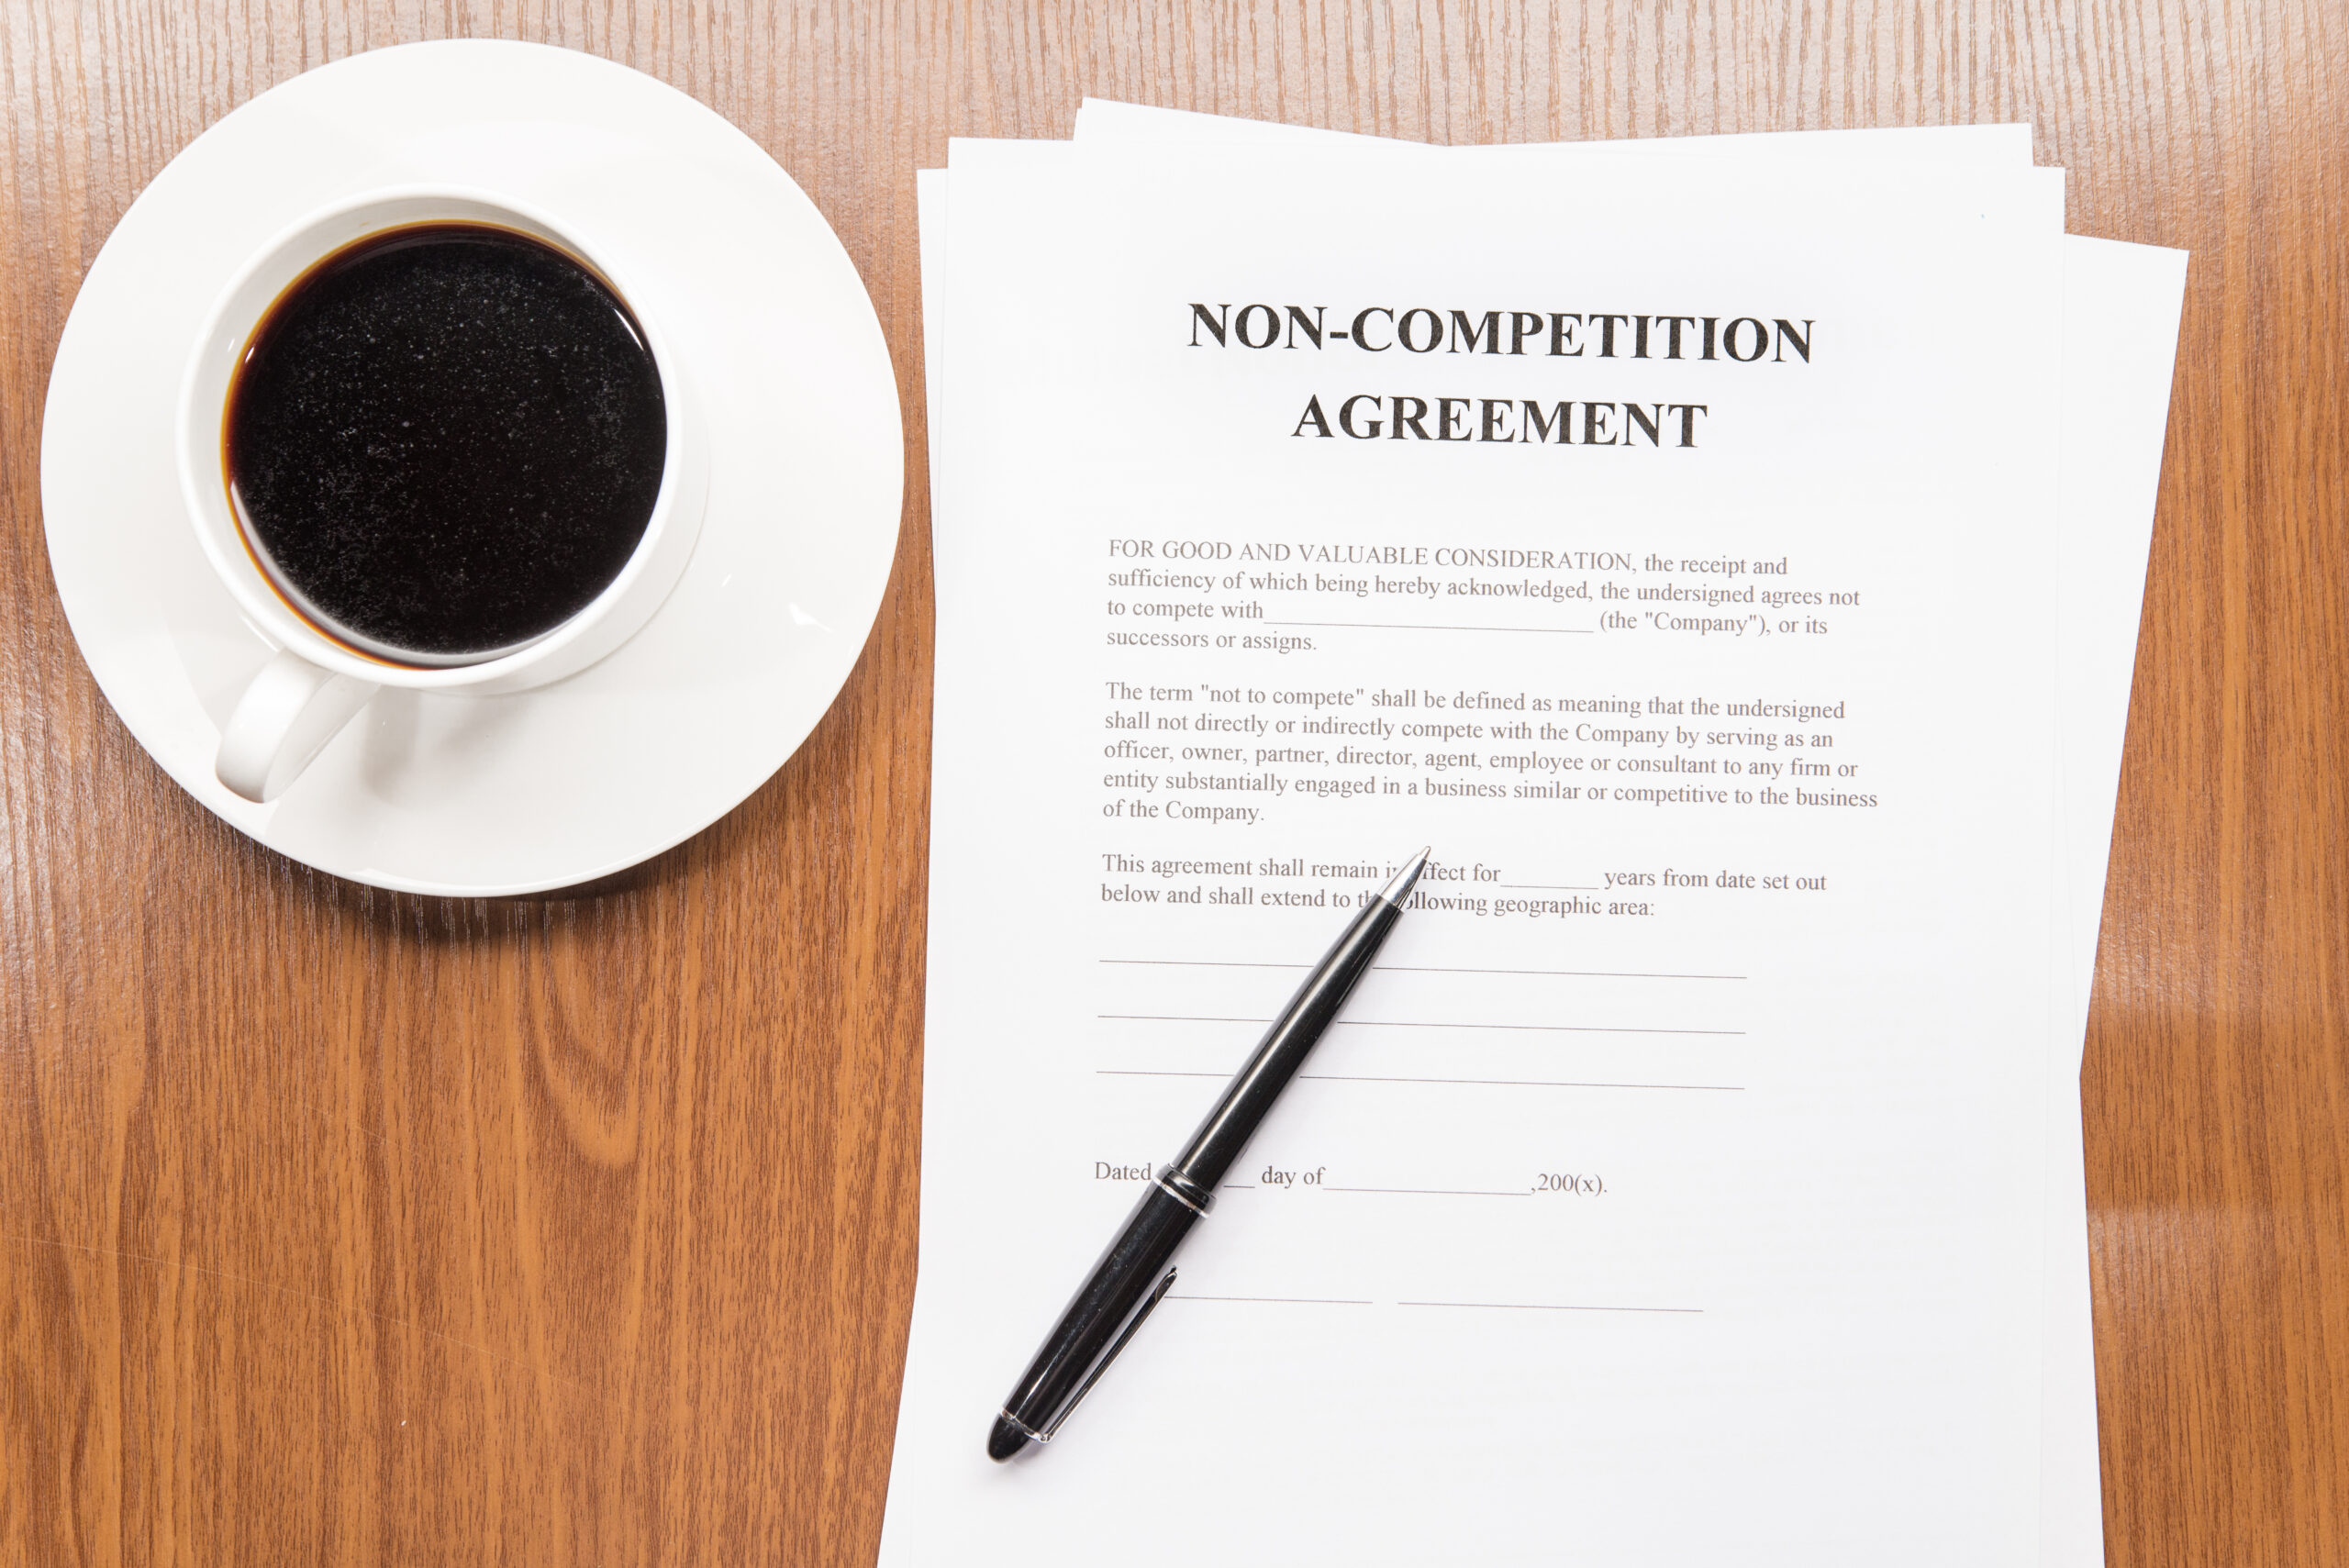  | Reviewing SC Non-Compete and Non-Solicit Agreements